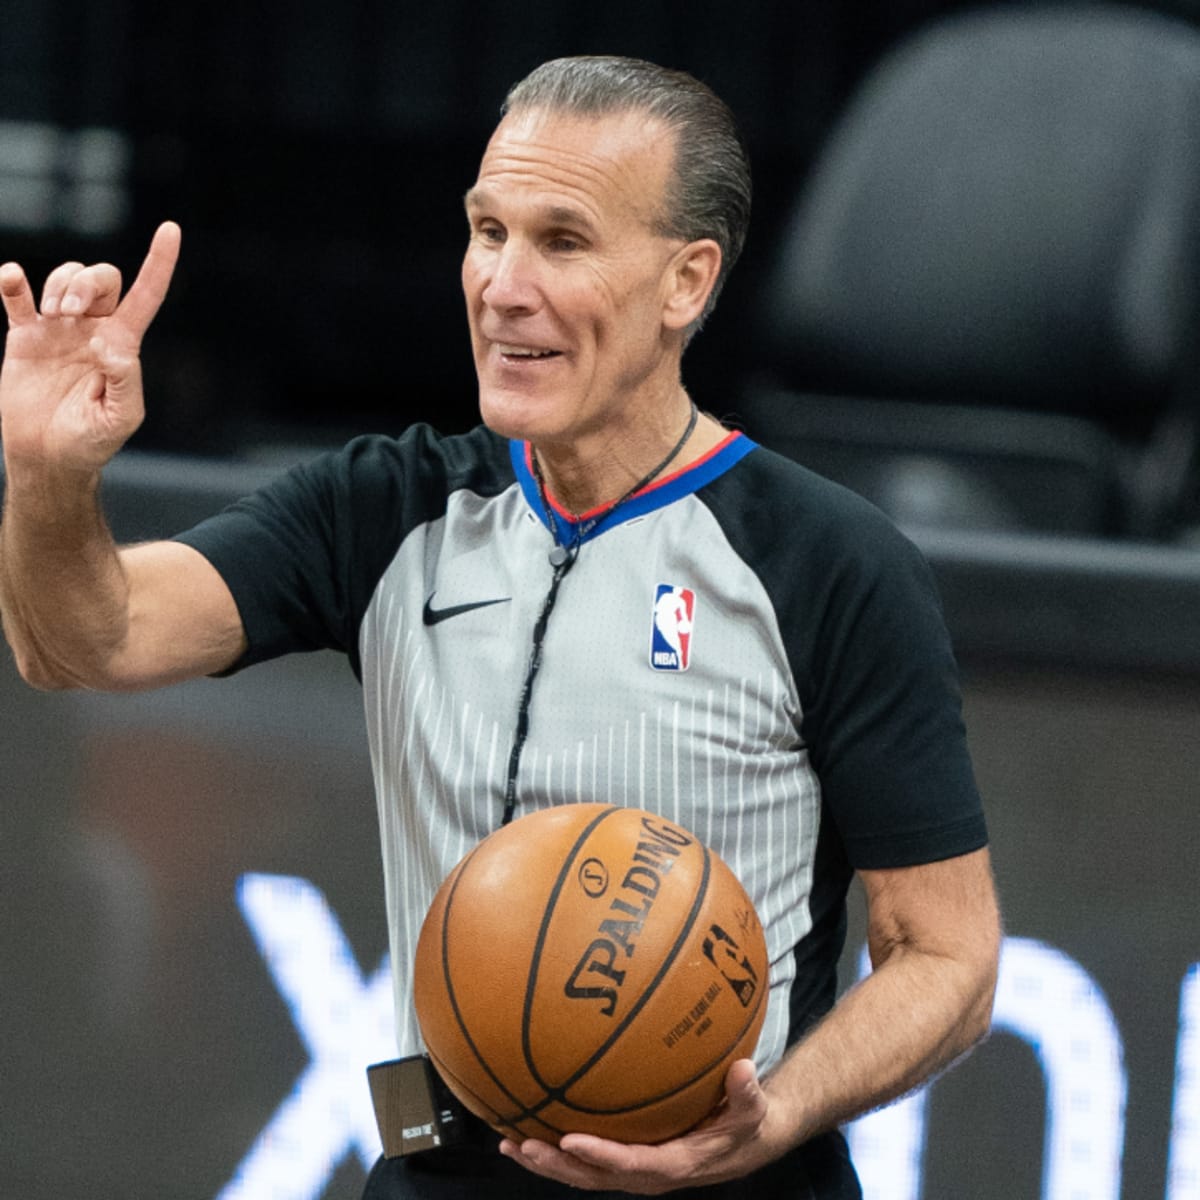 Korean referee who moved to U.S. on a dream to become NBA referee  officially lands the job